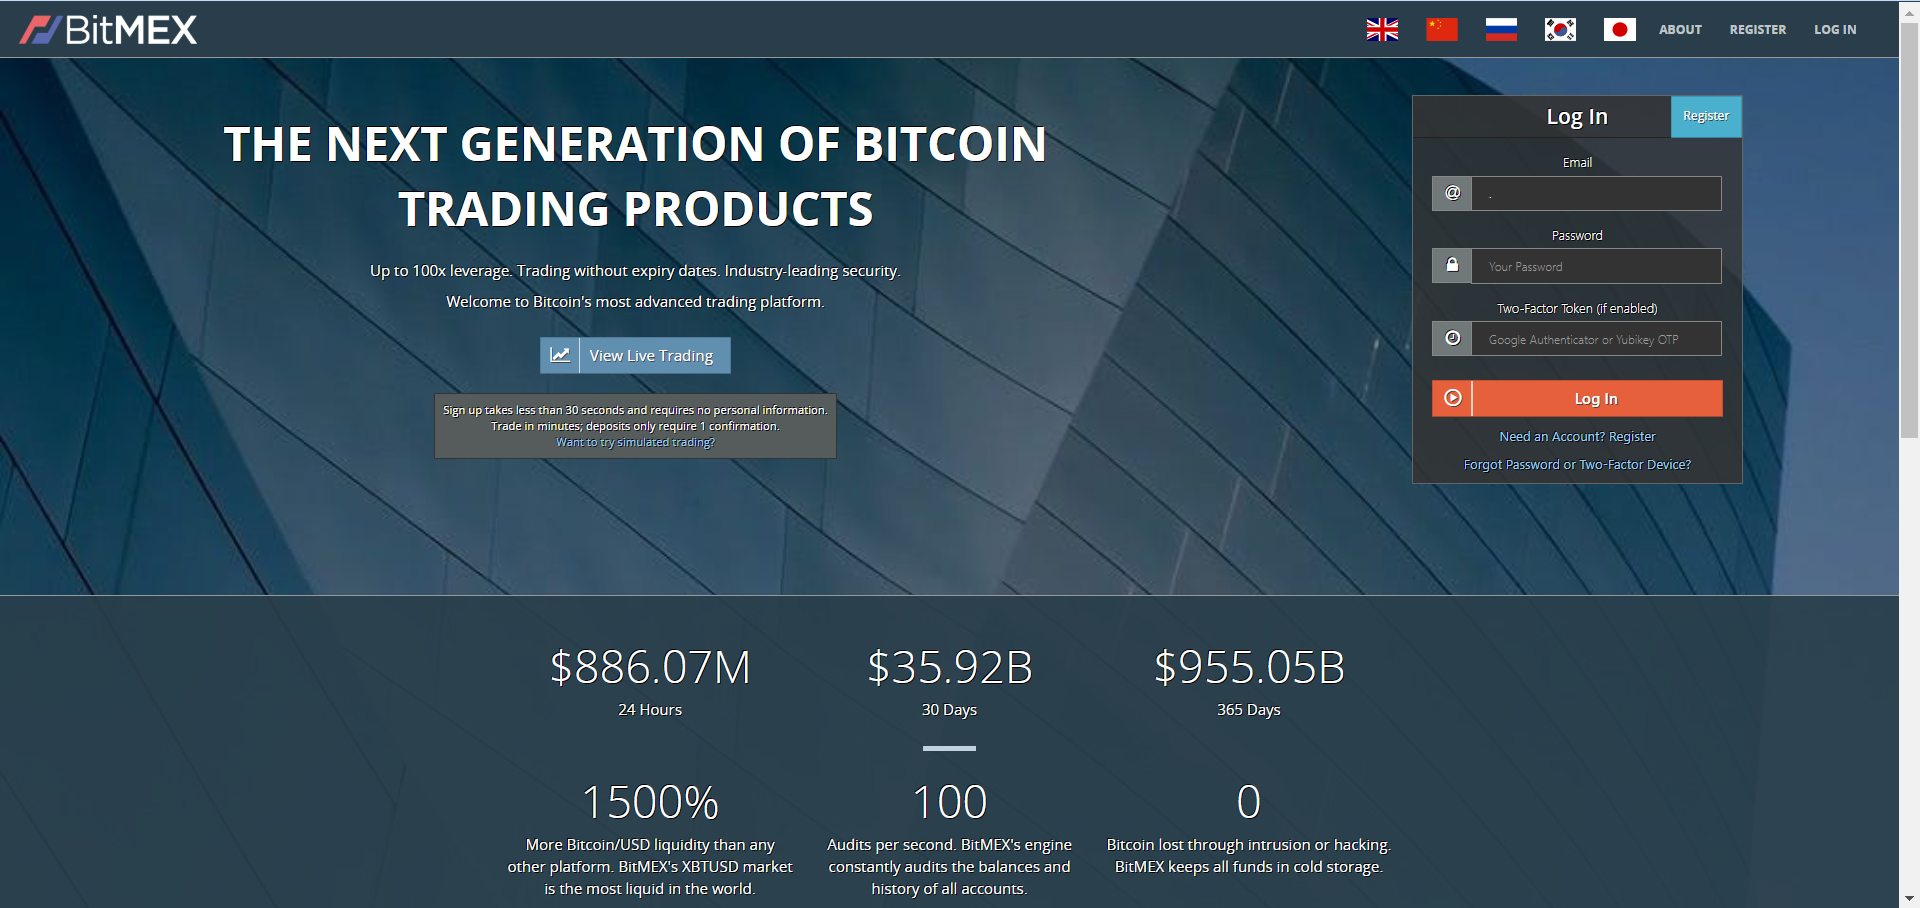 The Next Generation of Bitcoin Trading Products